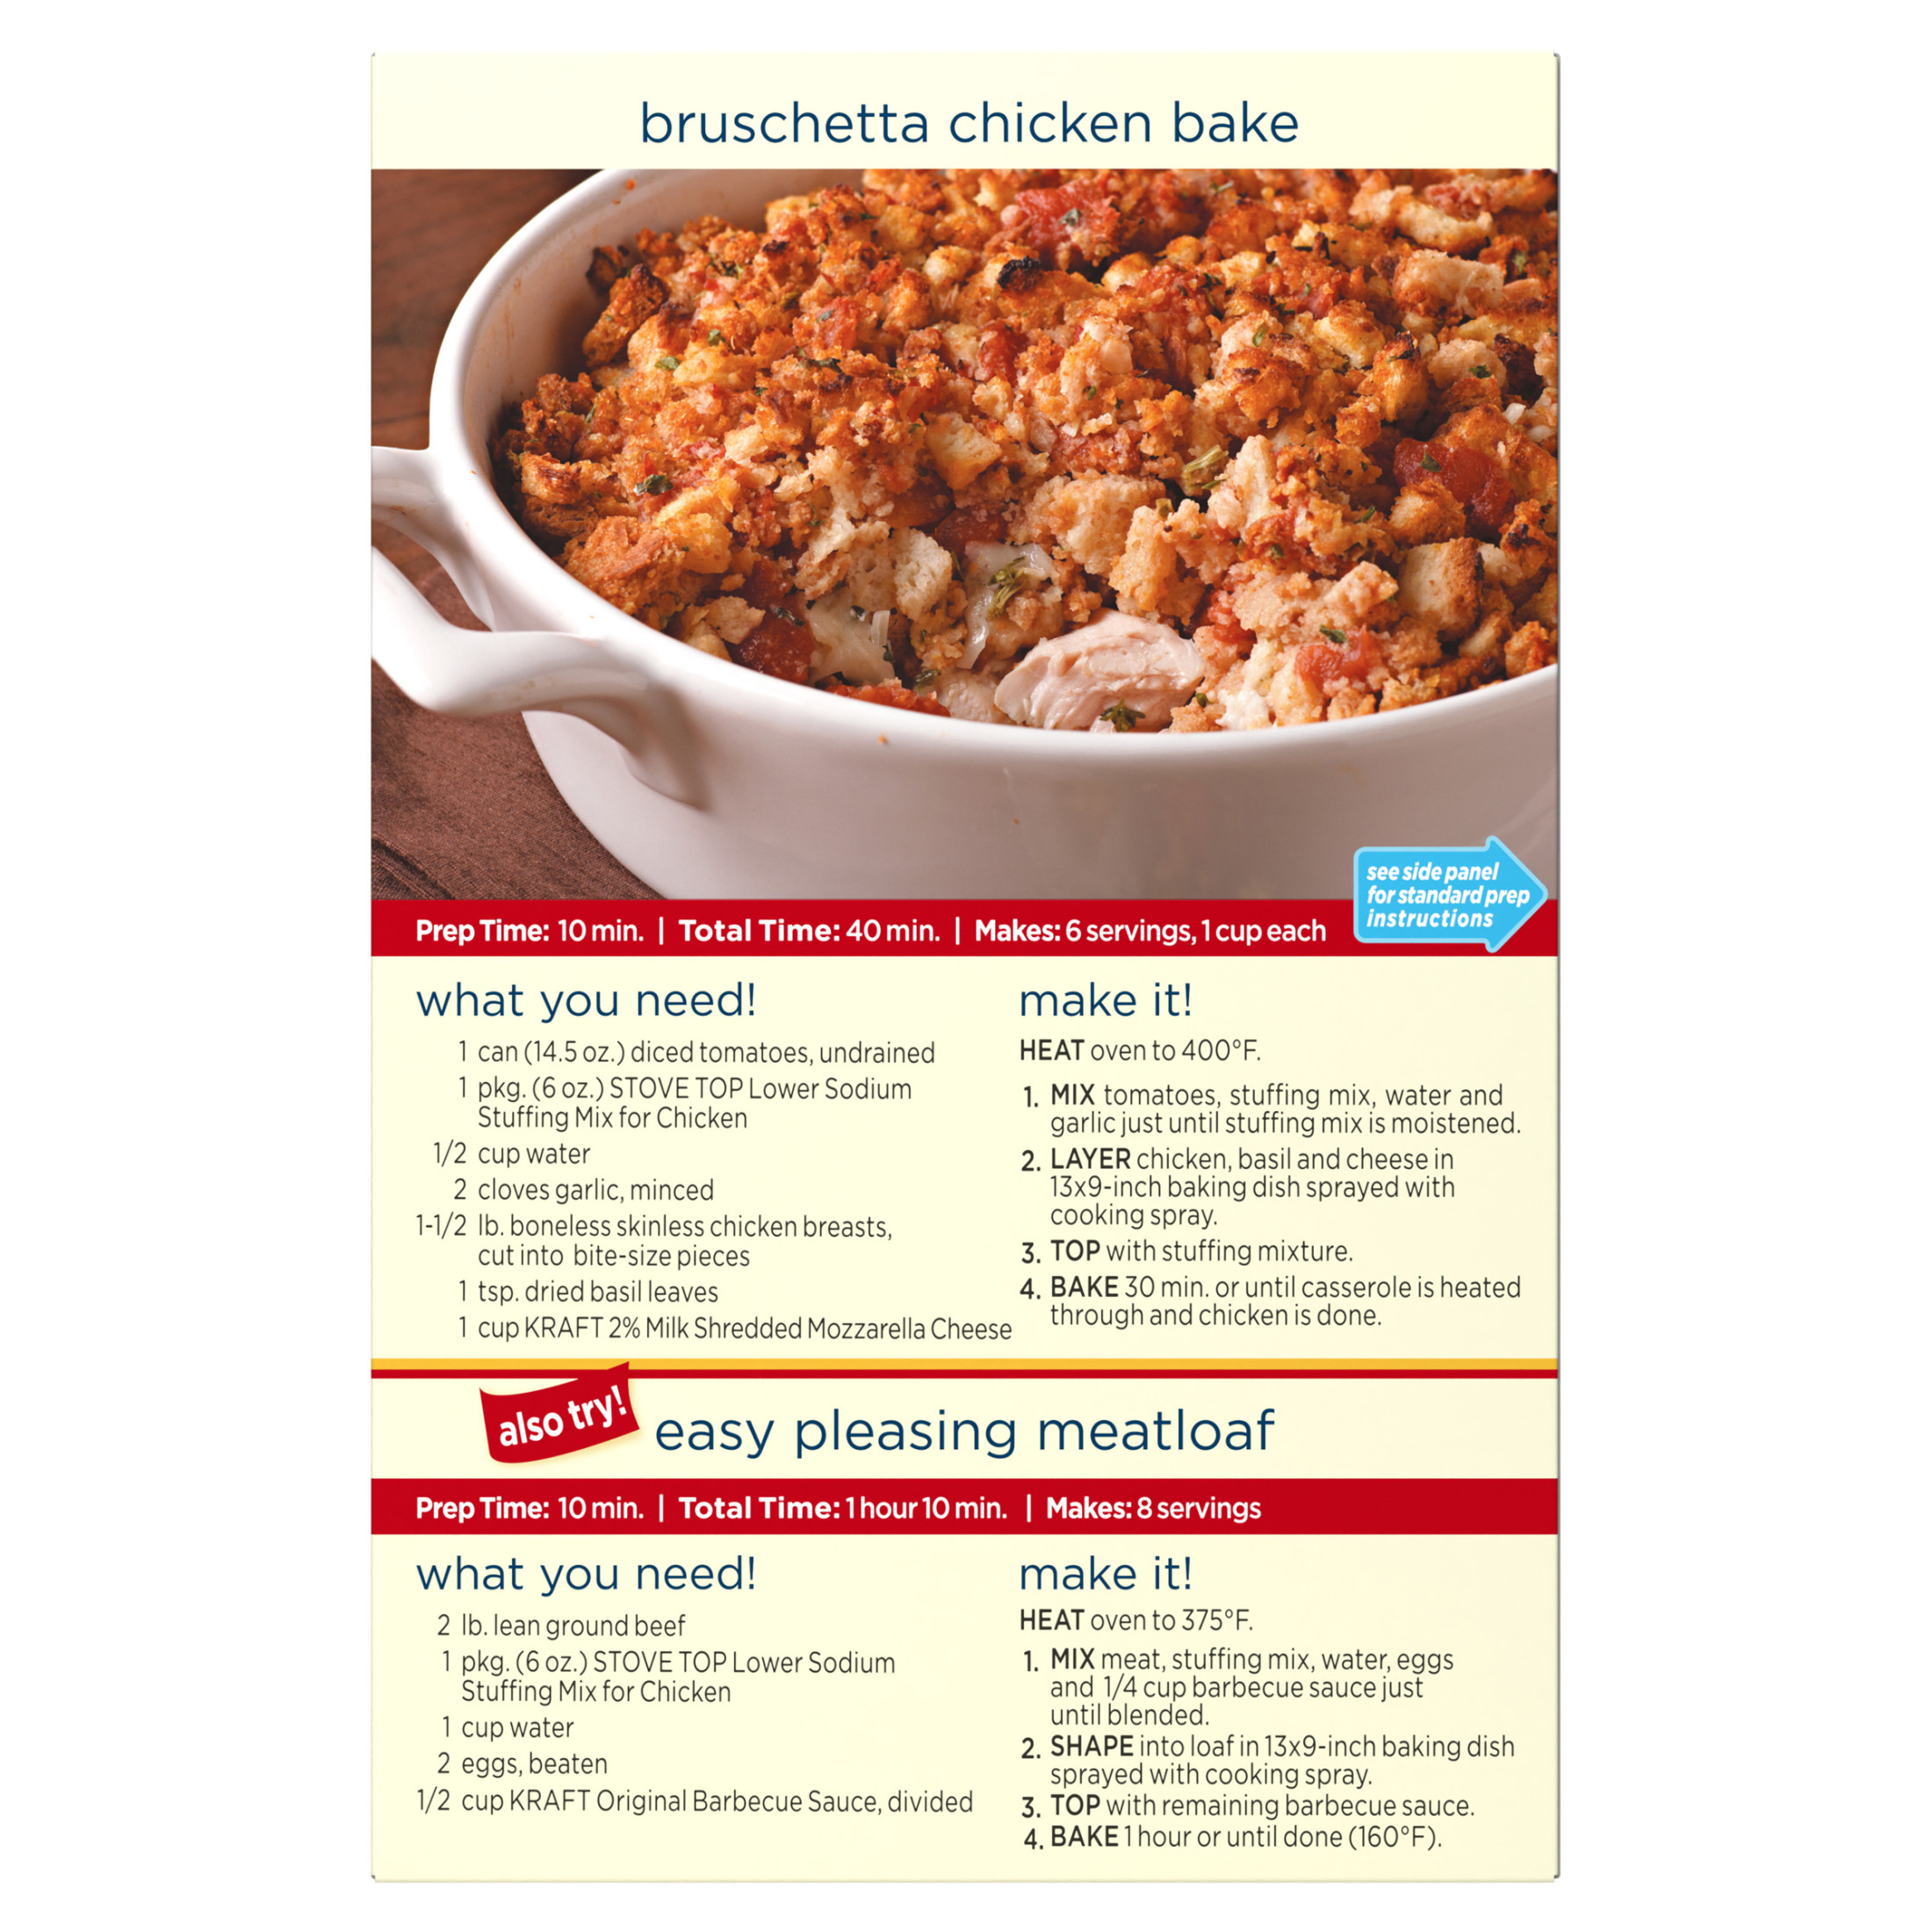 Stove Top Low Sodium Chicken Stuffing Mix Side Dish with 25% Less Sodium, 6 oz Box - image 4 of 8